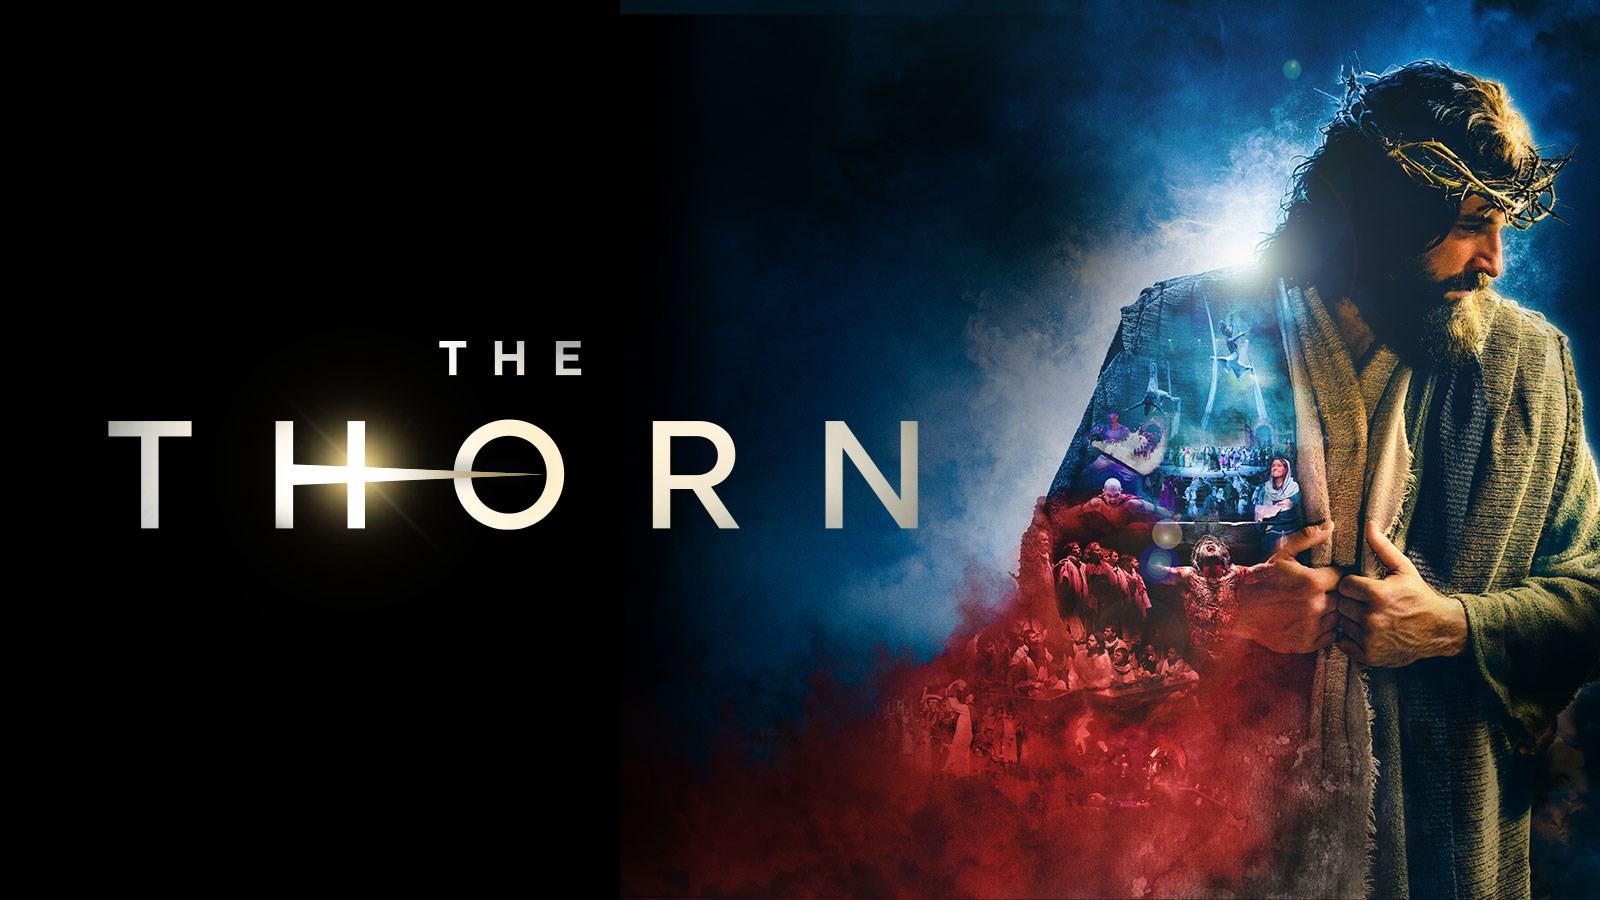 THORN, THE